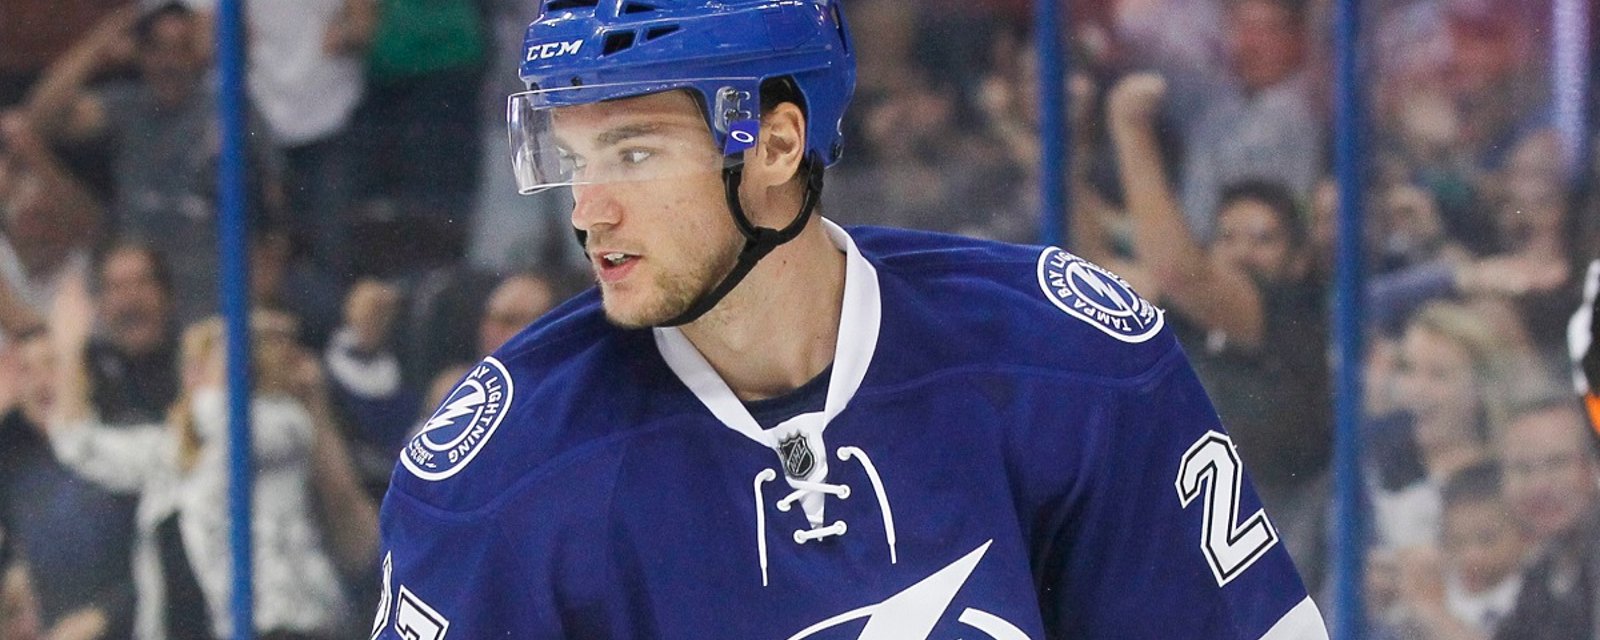 Breaking: Jonathan Drouin signs a monster contract with the Habs!